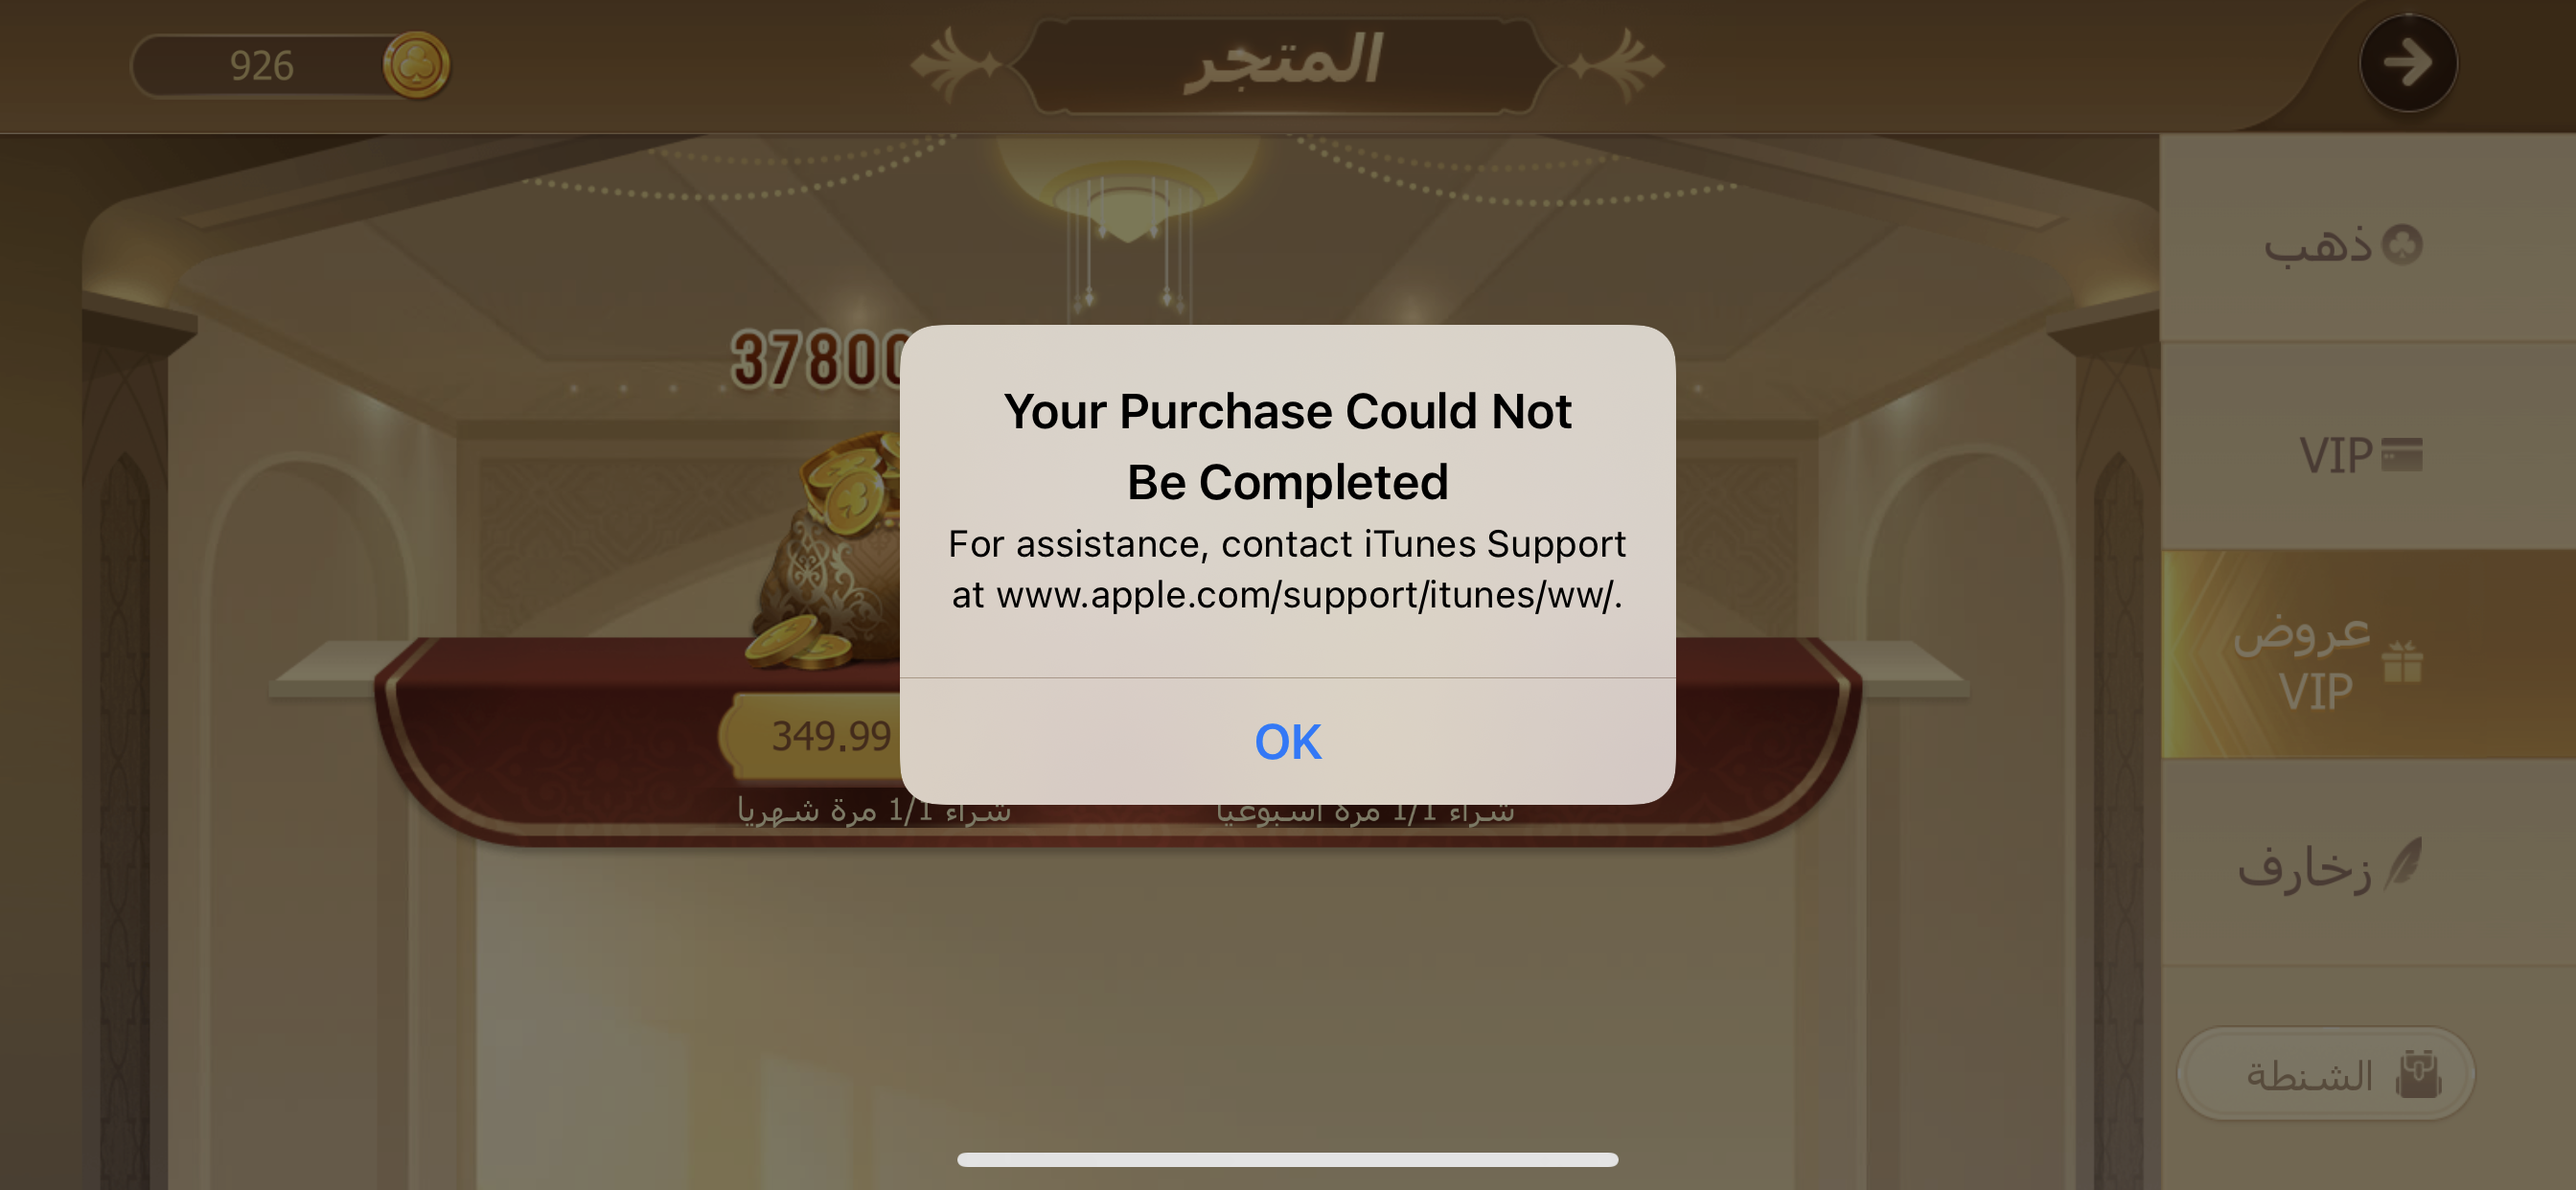 Your Purchase Could Not Be Completed - Apple Community